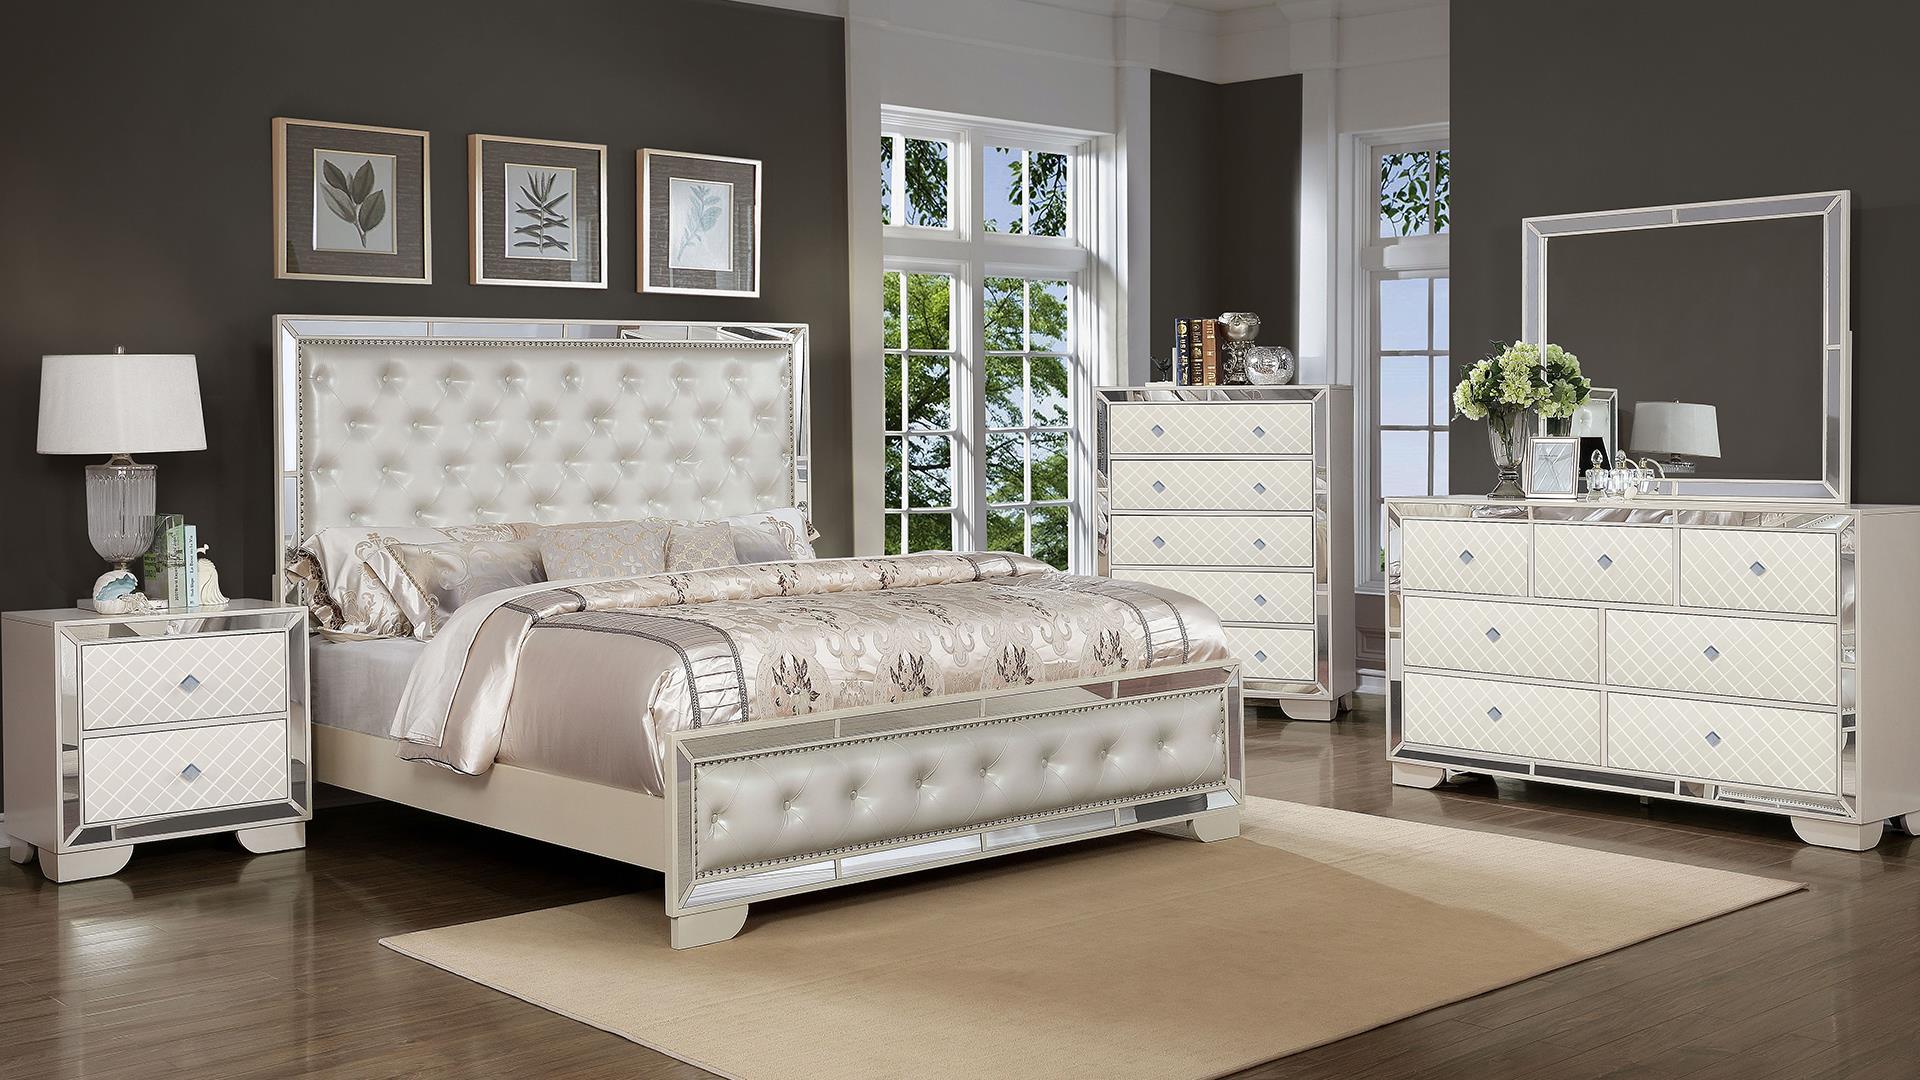 

    
Glam Beige Mirrored Inlay Tufted Queen Bedroom Set 4P MADISON Galaxy Home Modern
